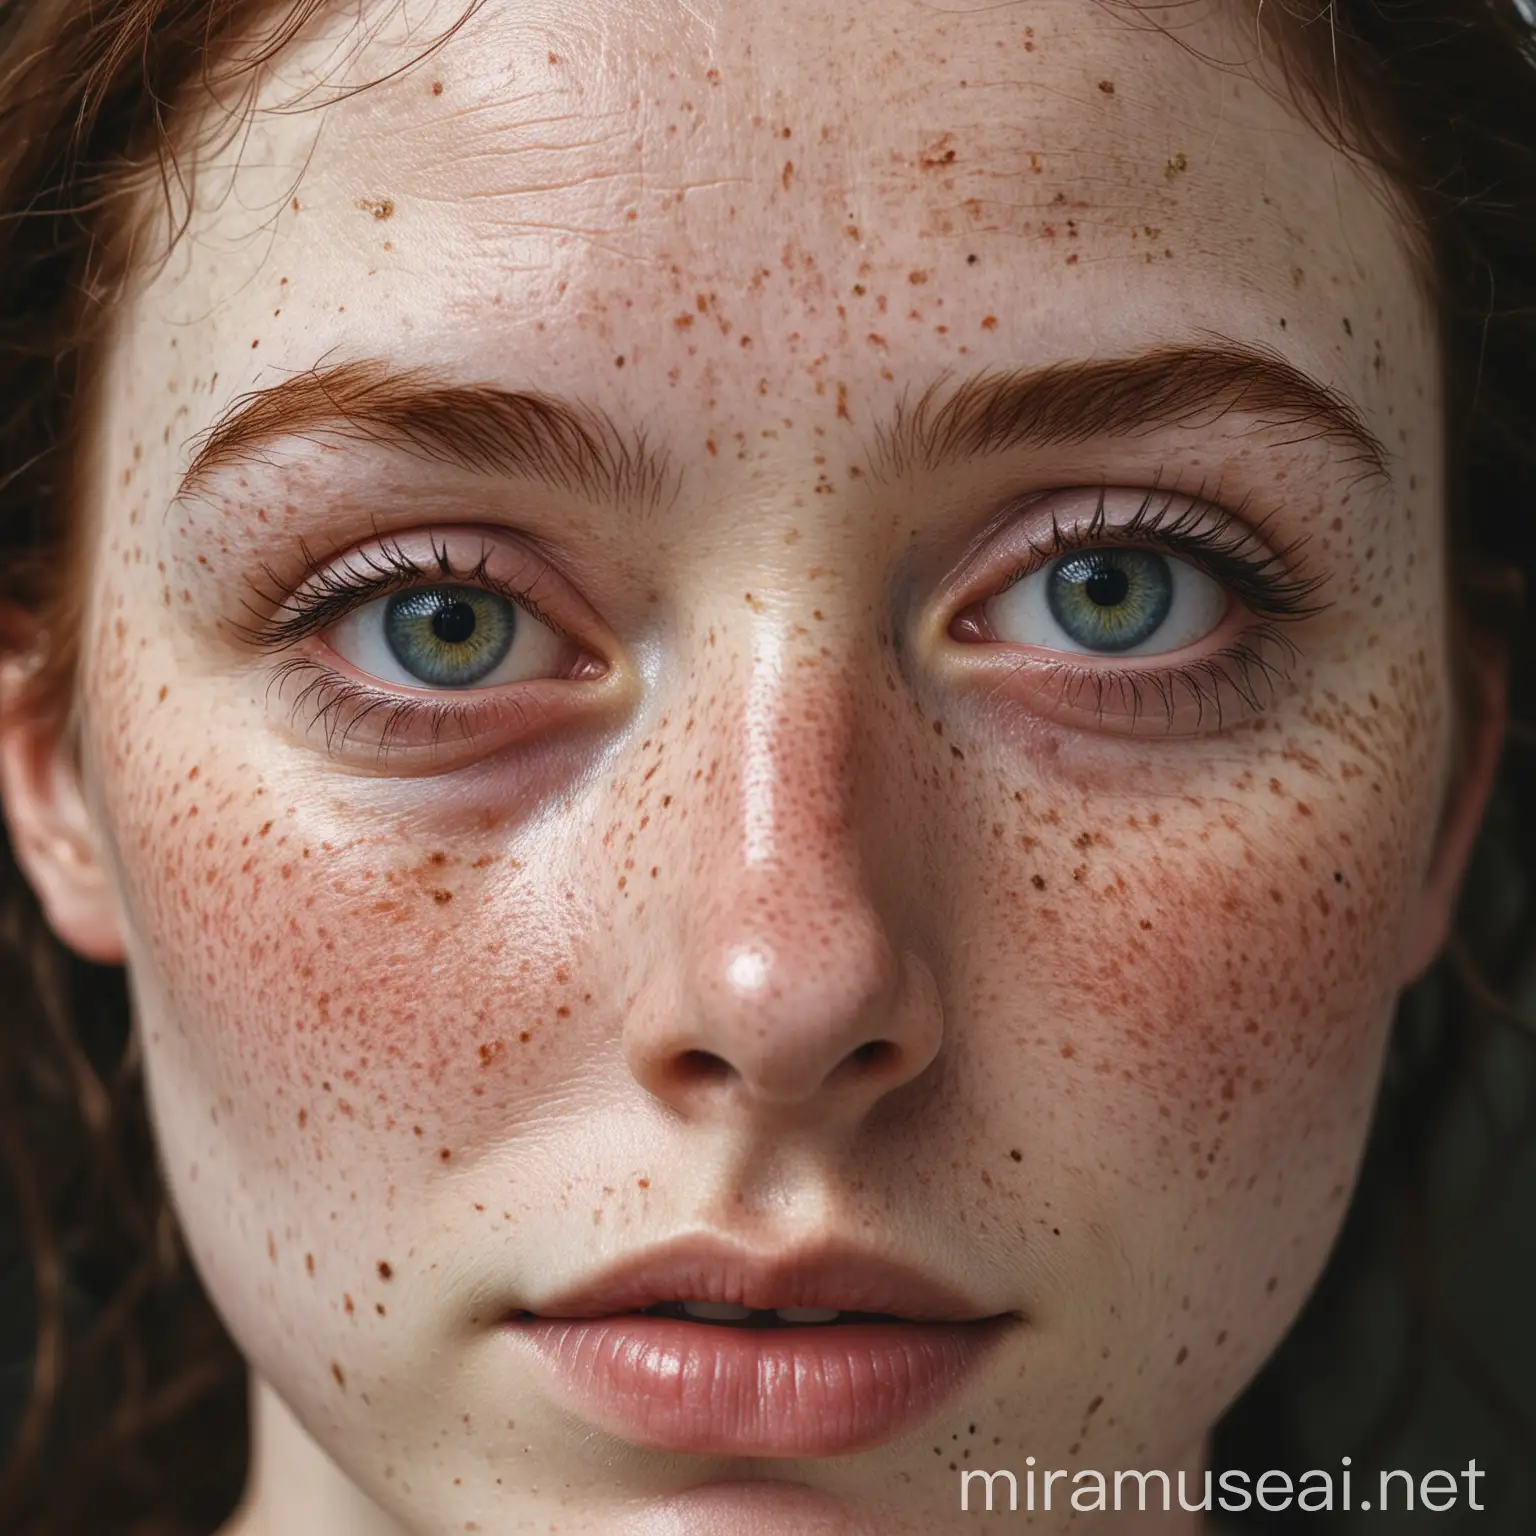 pale face of a woman with freckles, with a congihia on the eye